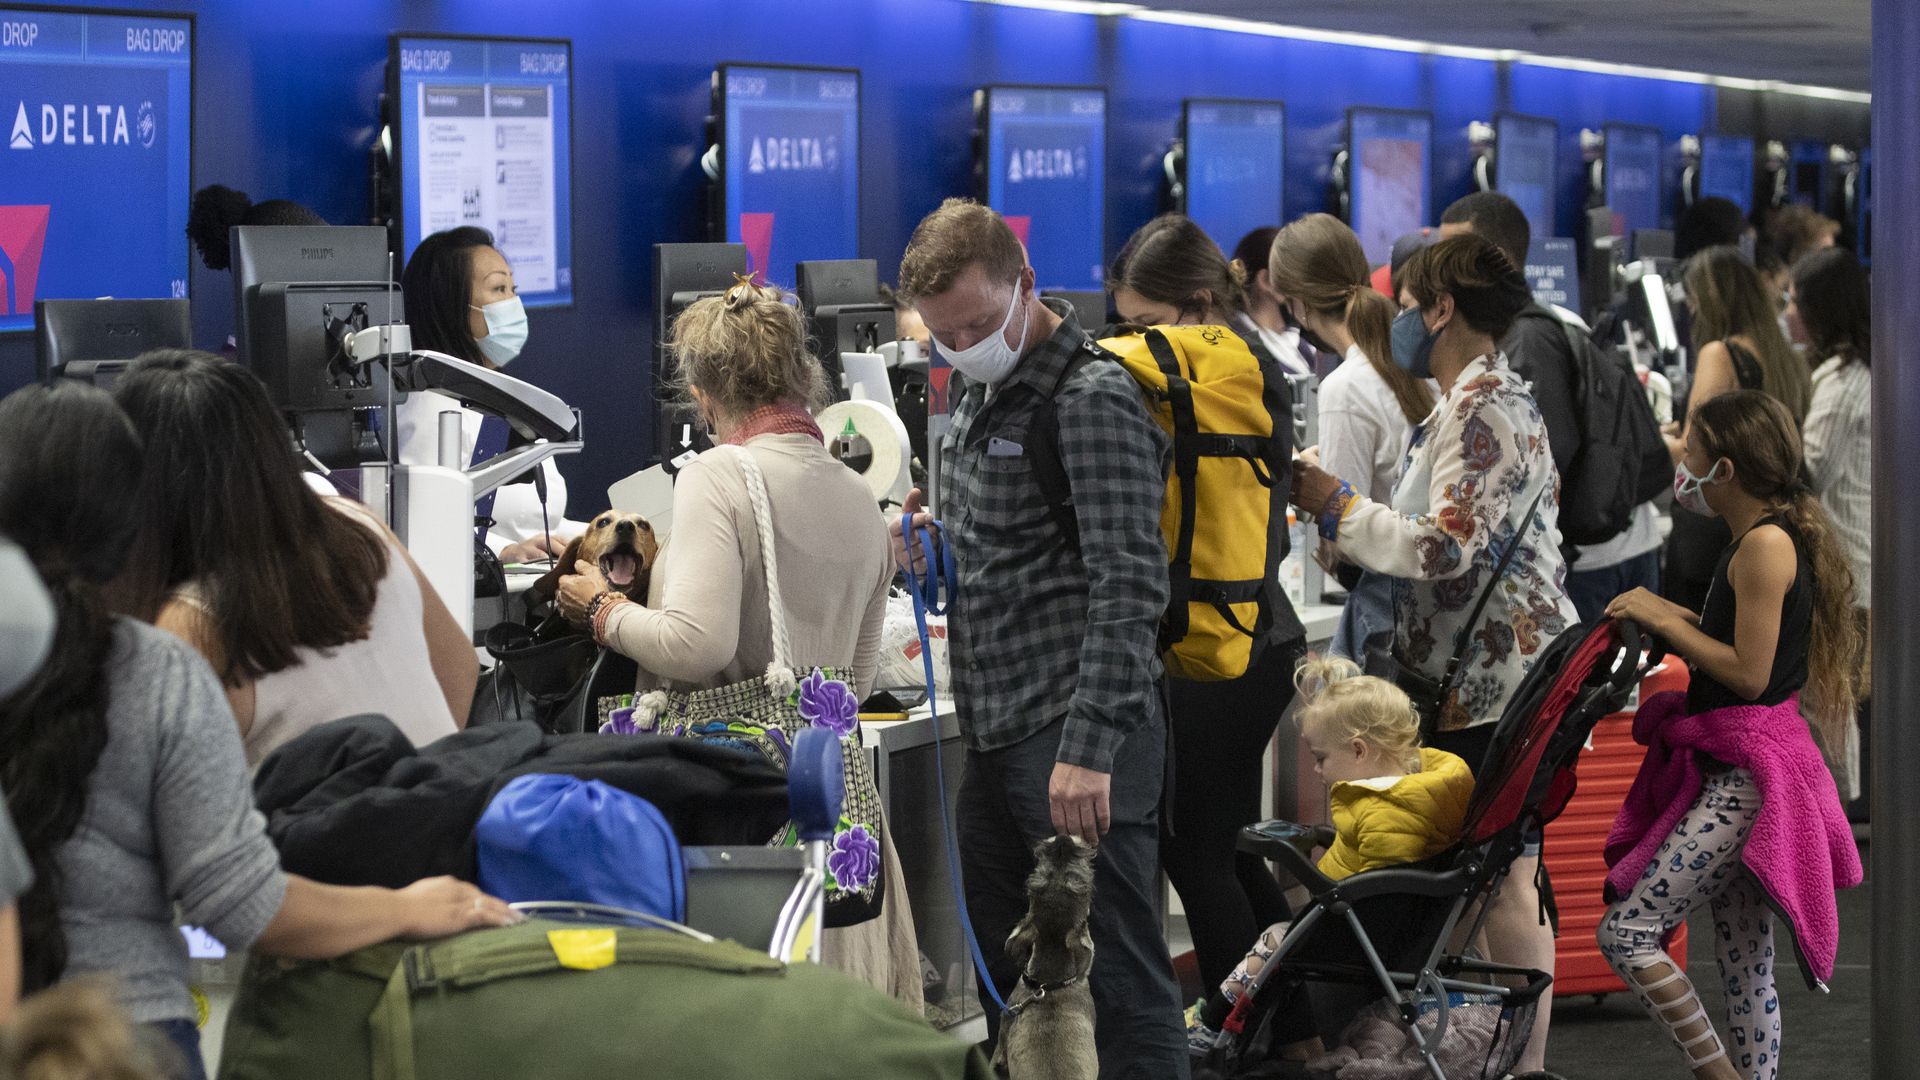 Travelers in line at a Delta counter at LAX.